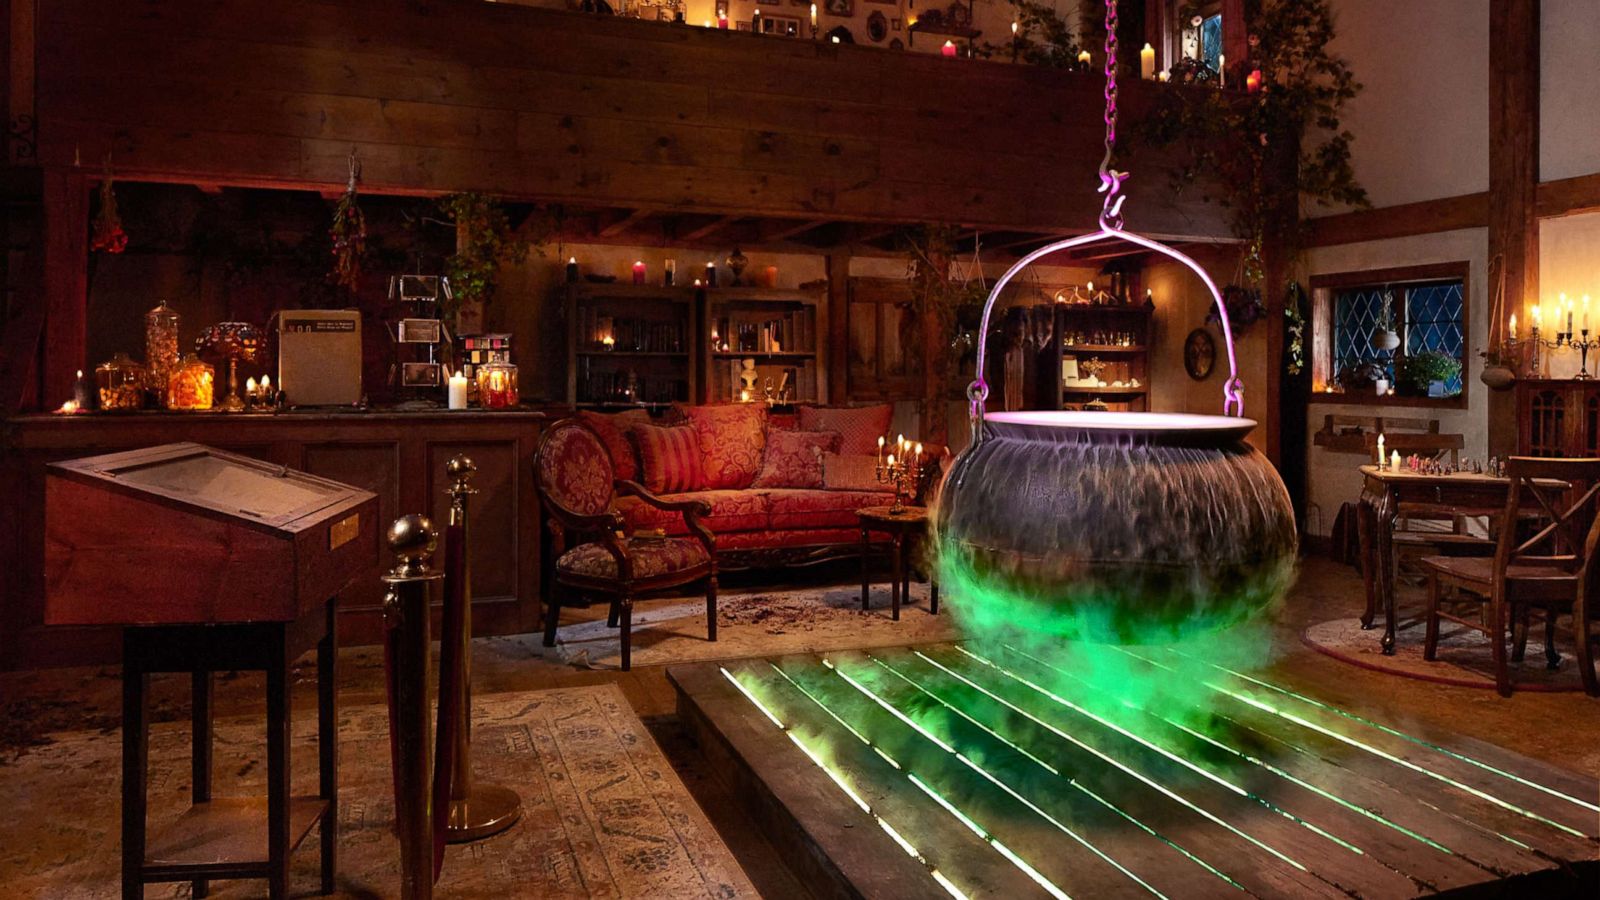 You can stay in the 'Hocus Pocus' house on Airbnb - Good Morning America